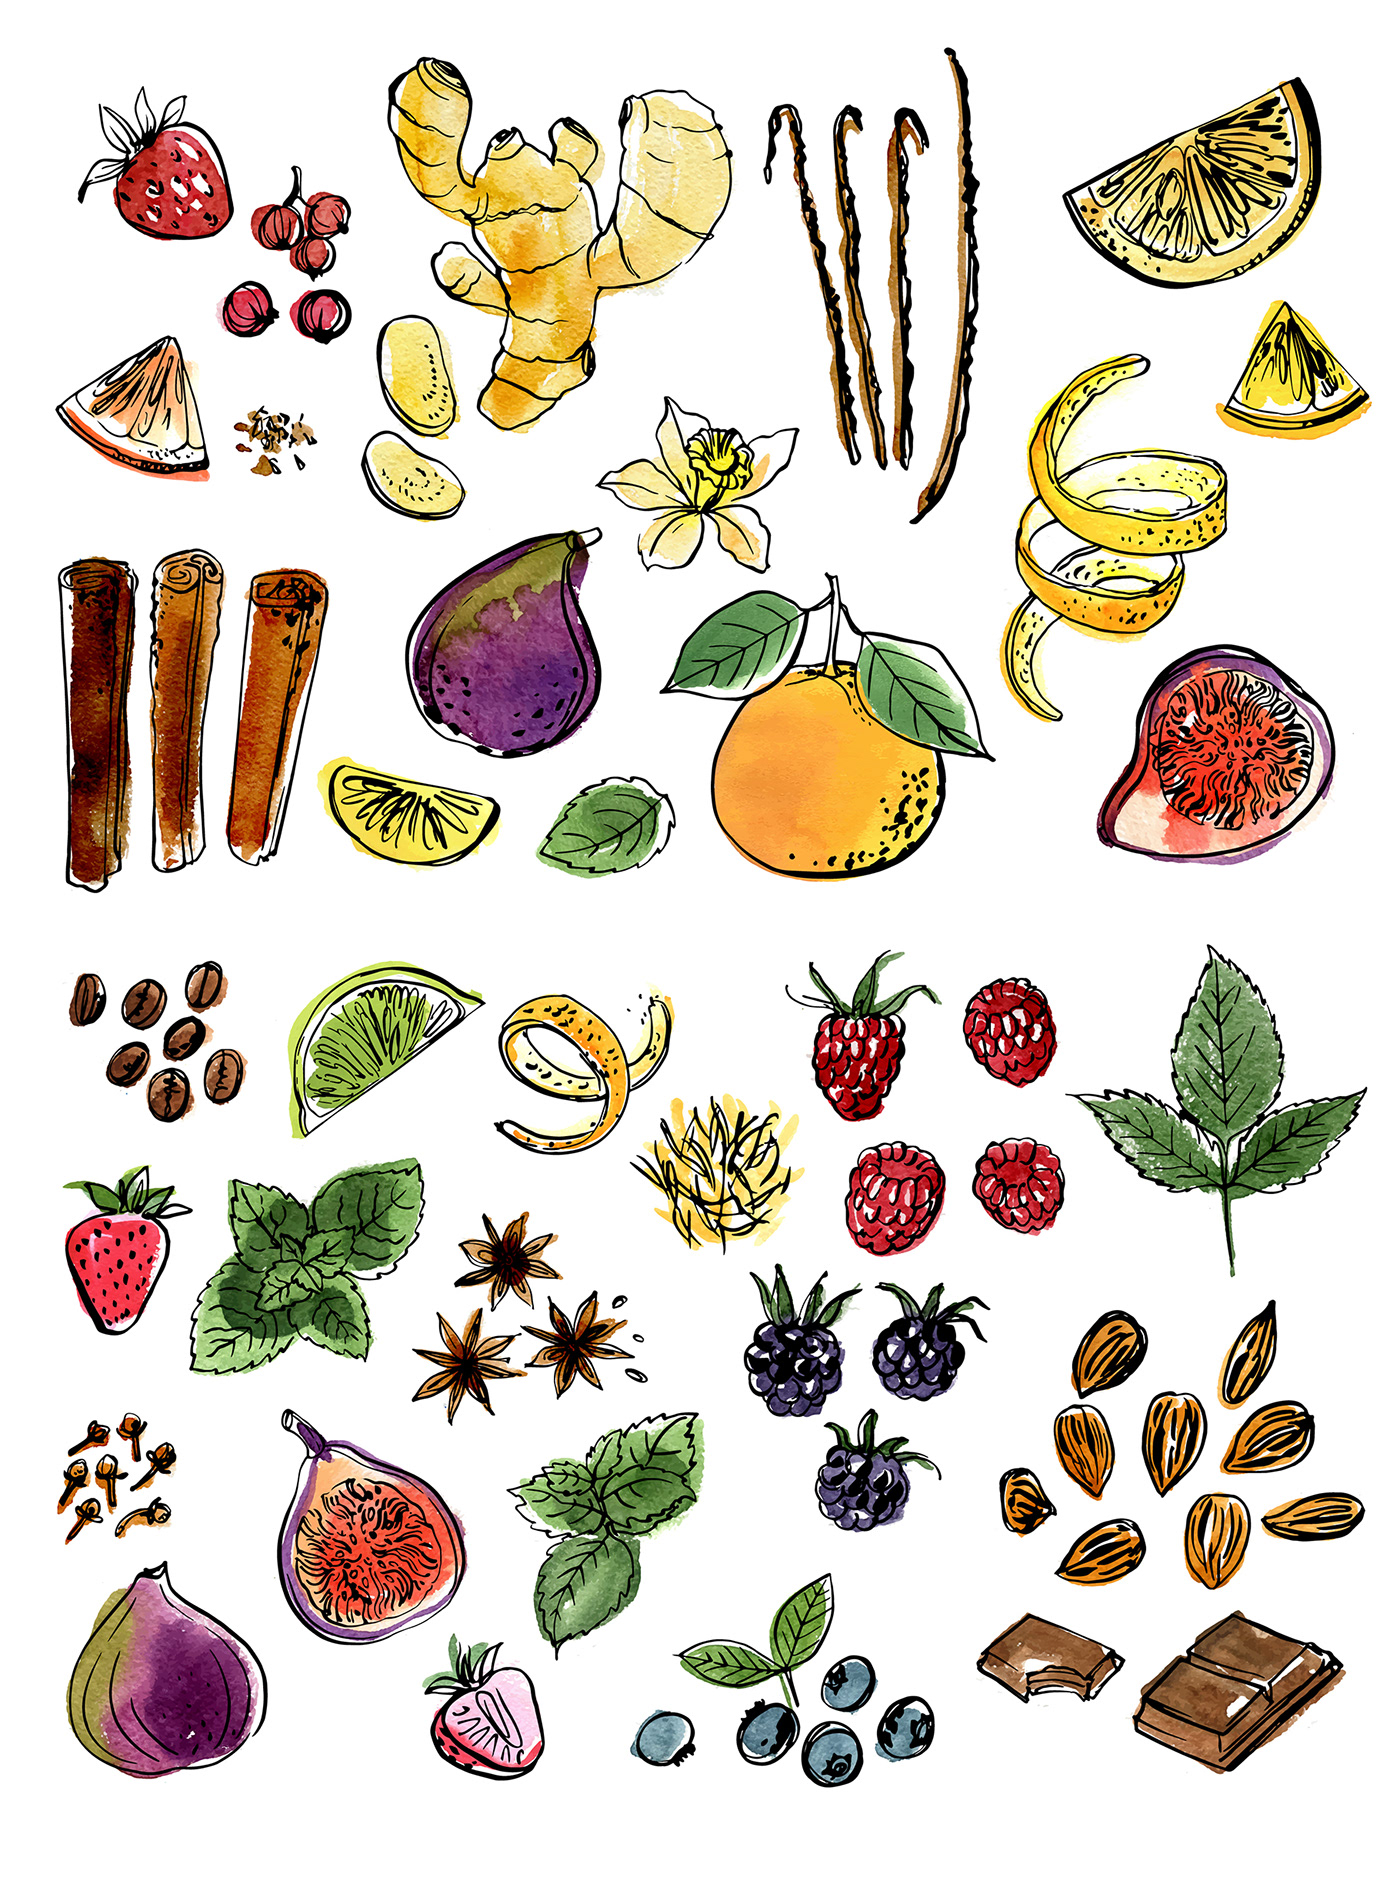 Colored sketch of fruits and vegetables on Behance